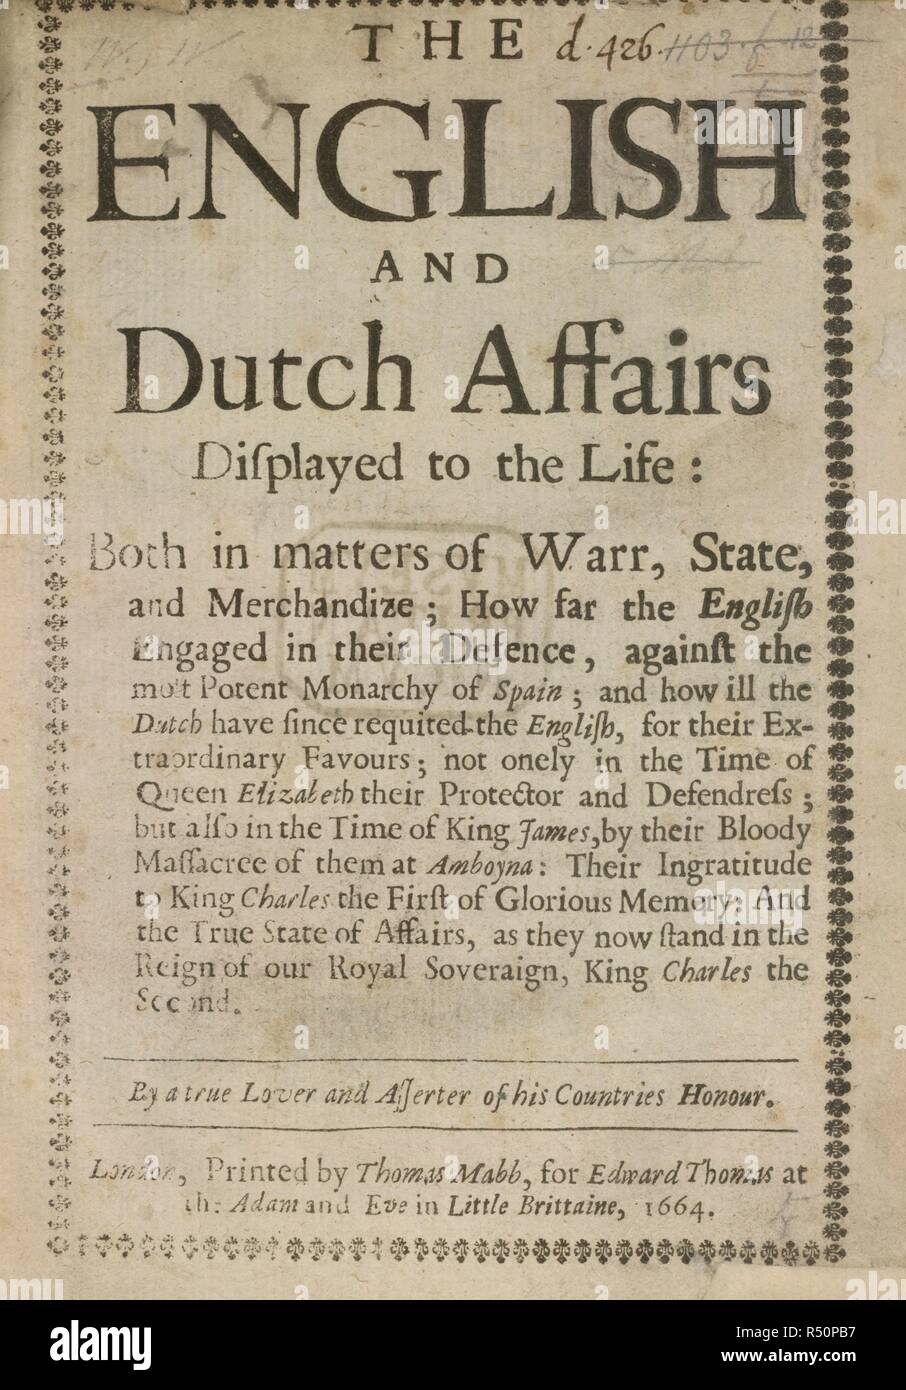 English and Dutch affairs. The English and Dutch affairs displayed to the Lif. London, 1664. Title page.  Image taken from The English and Dutch affairs displayed to the Life: both in matters of warr, state, and merchandise; how far the English engaged in their defence against the most potent monarchy of Spain; and how ill theDutch have since requited the English for their extraordinary favours; By a true lover and asserter of his countries honour [signing himself W. W.].  Originally published/produced in London, 1664. . Source: 1103.f.12, title page. Language: English. Stock Photo